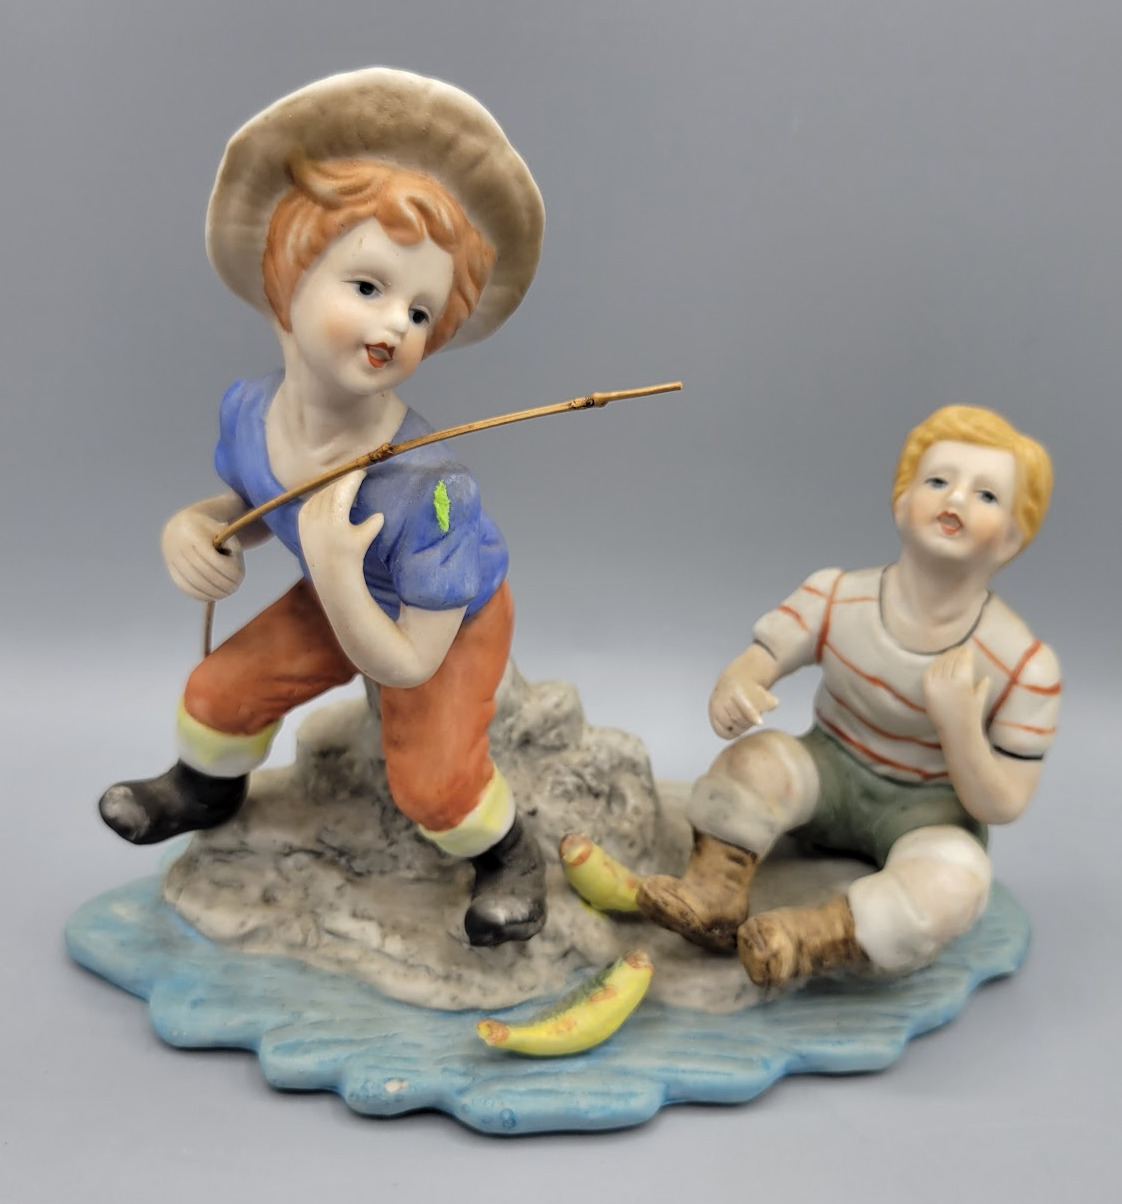 Vintage Porcelain Figurine of Two Little Boys Going Fishing Price Imports